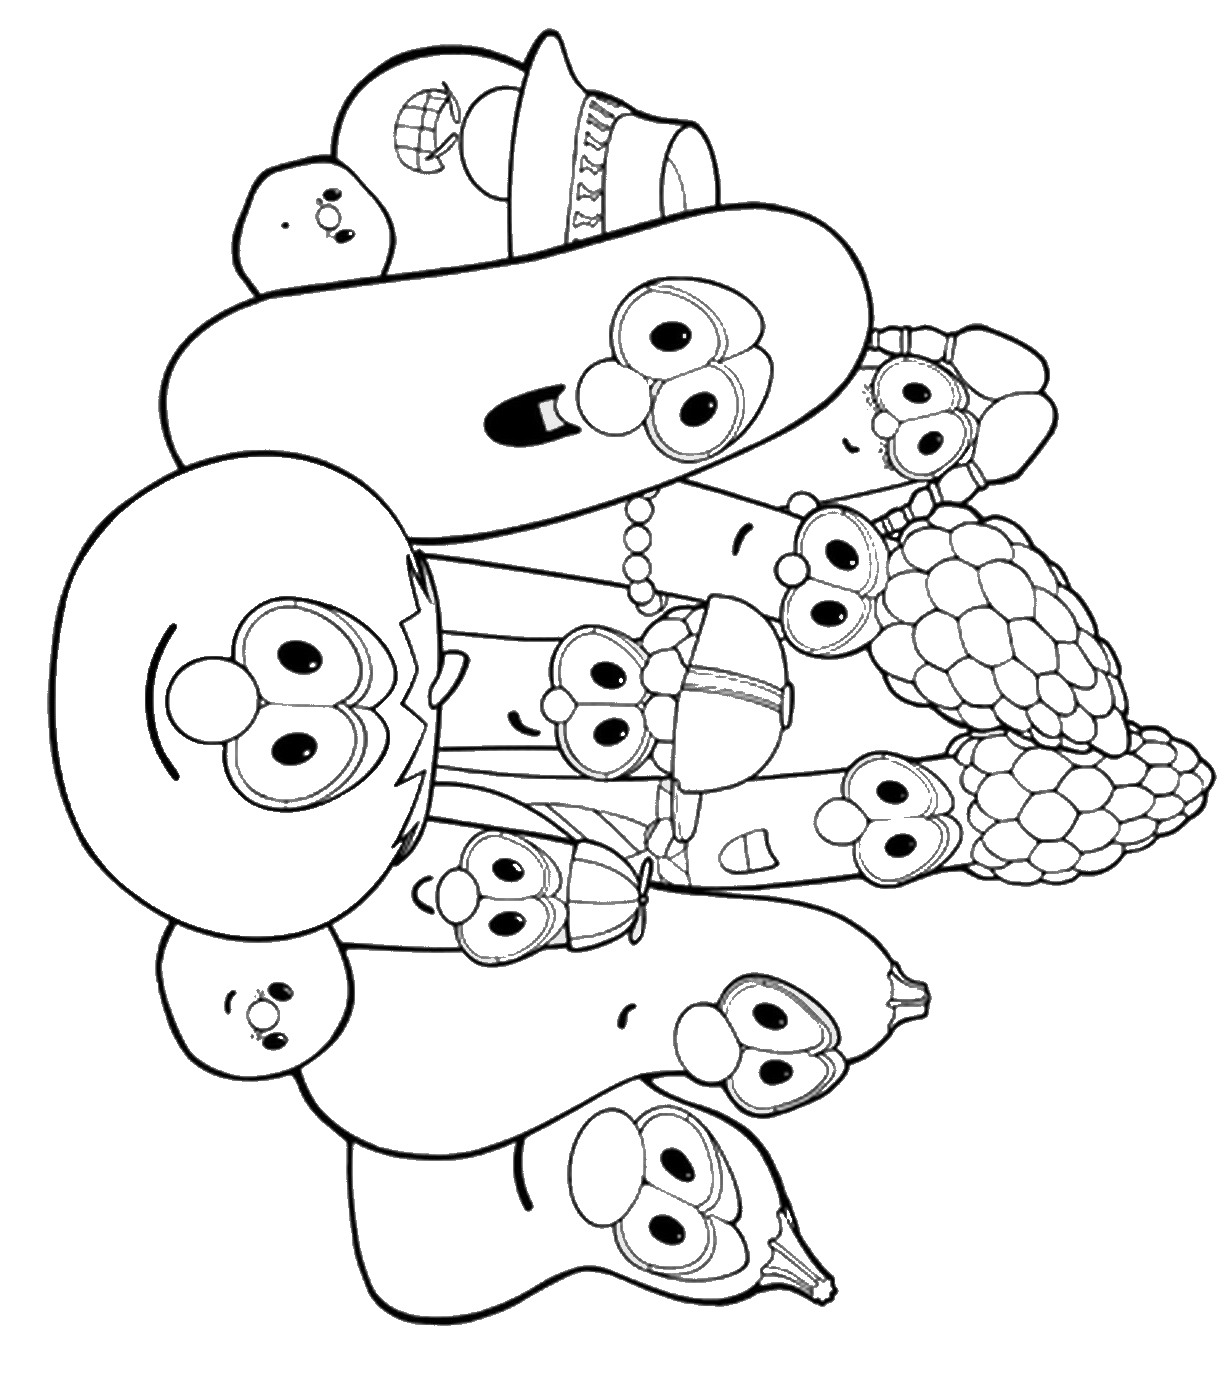 867 Simple Veggie Tales Coloring Pages For Kids with disney character